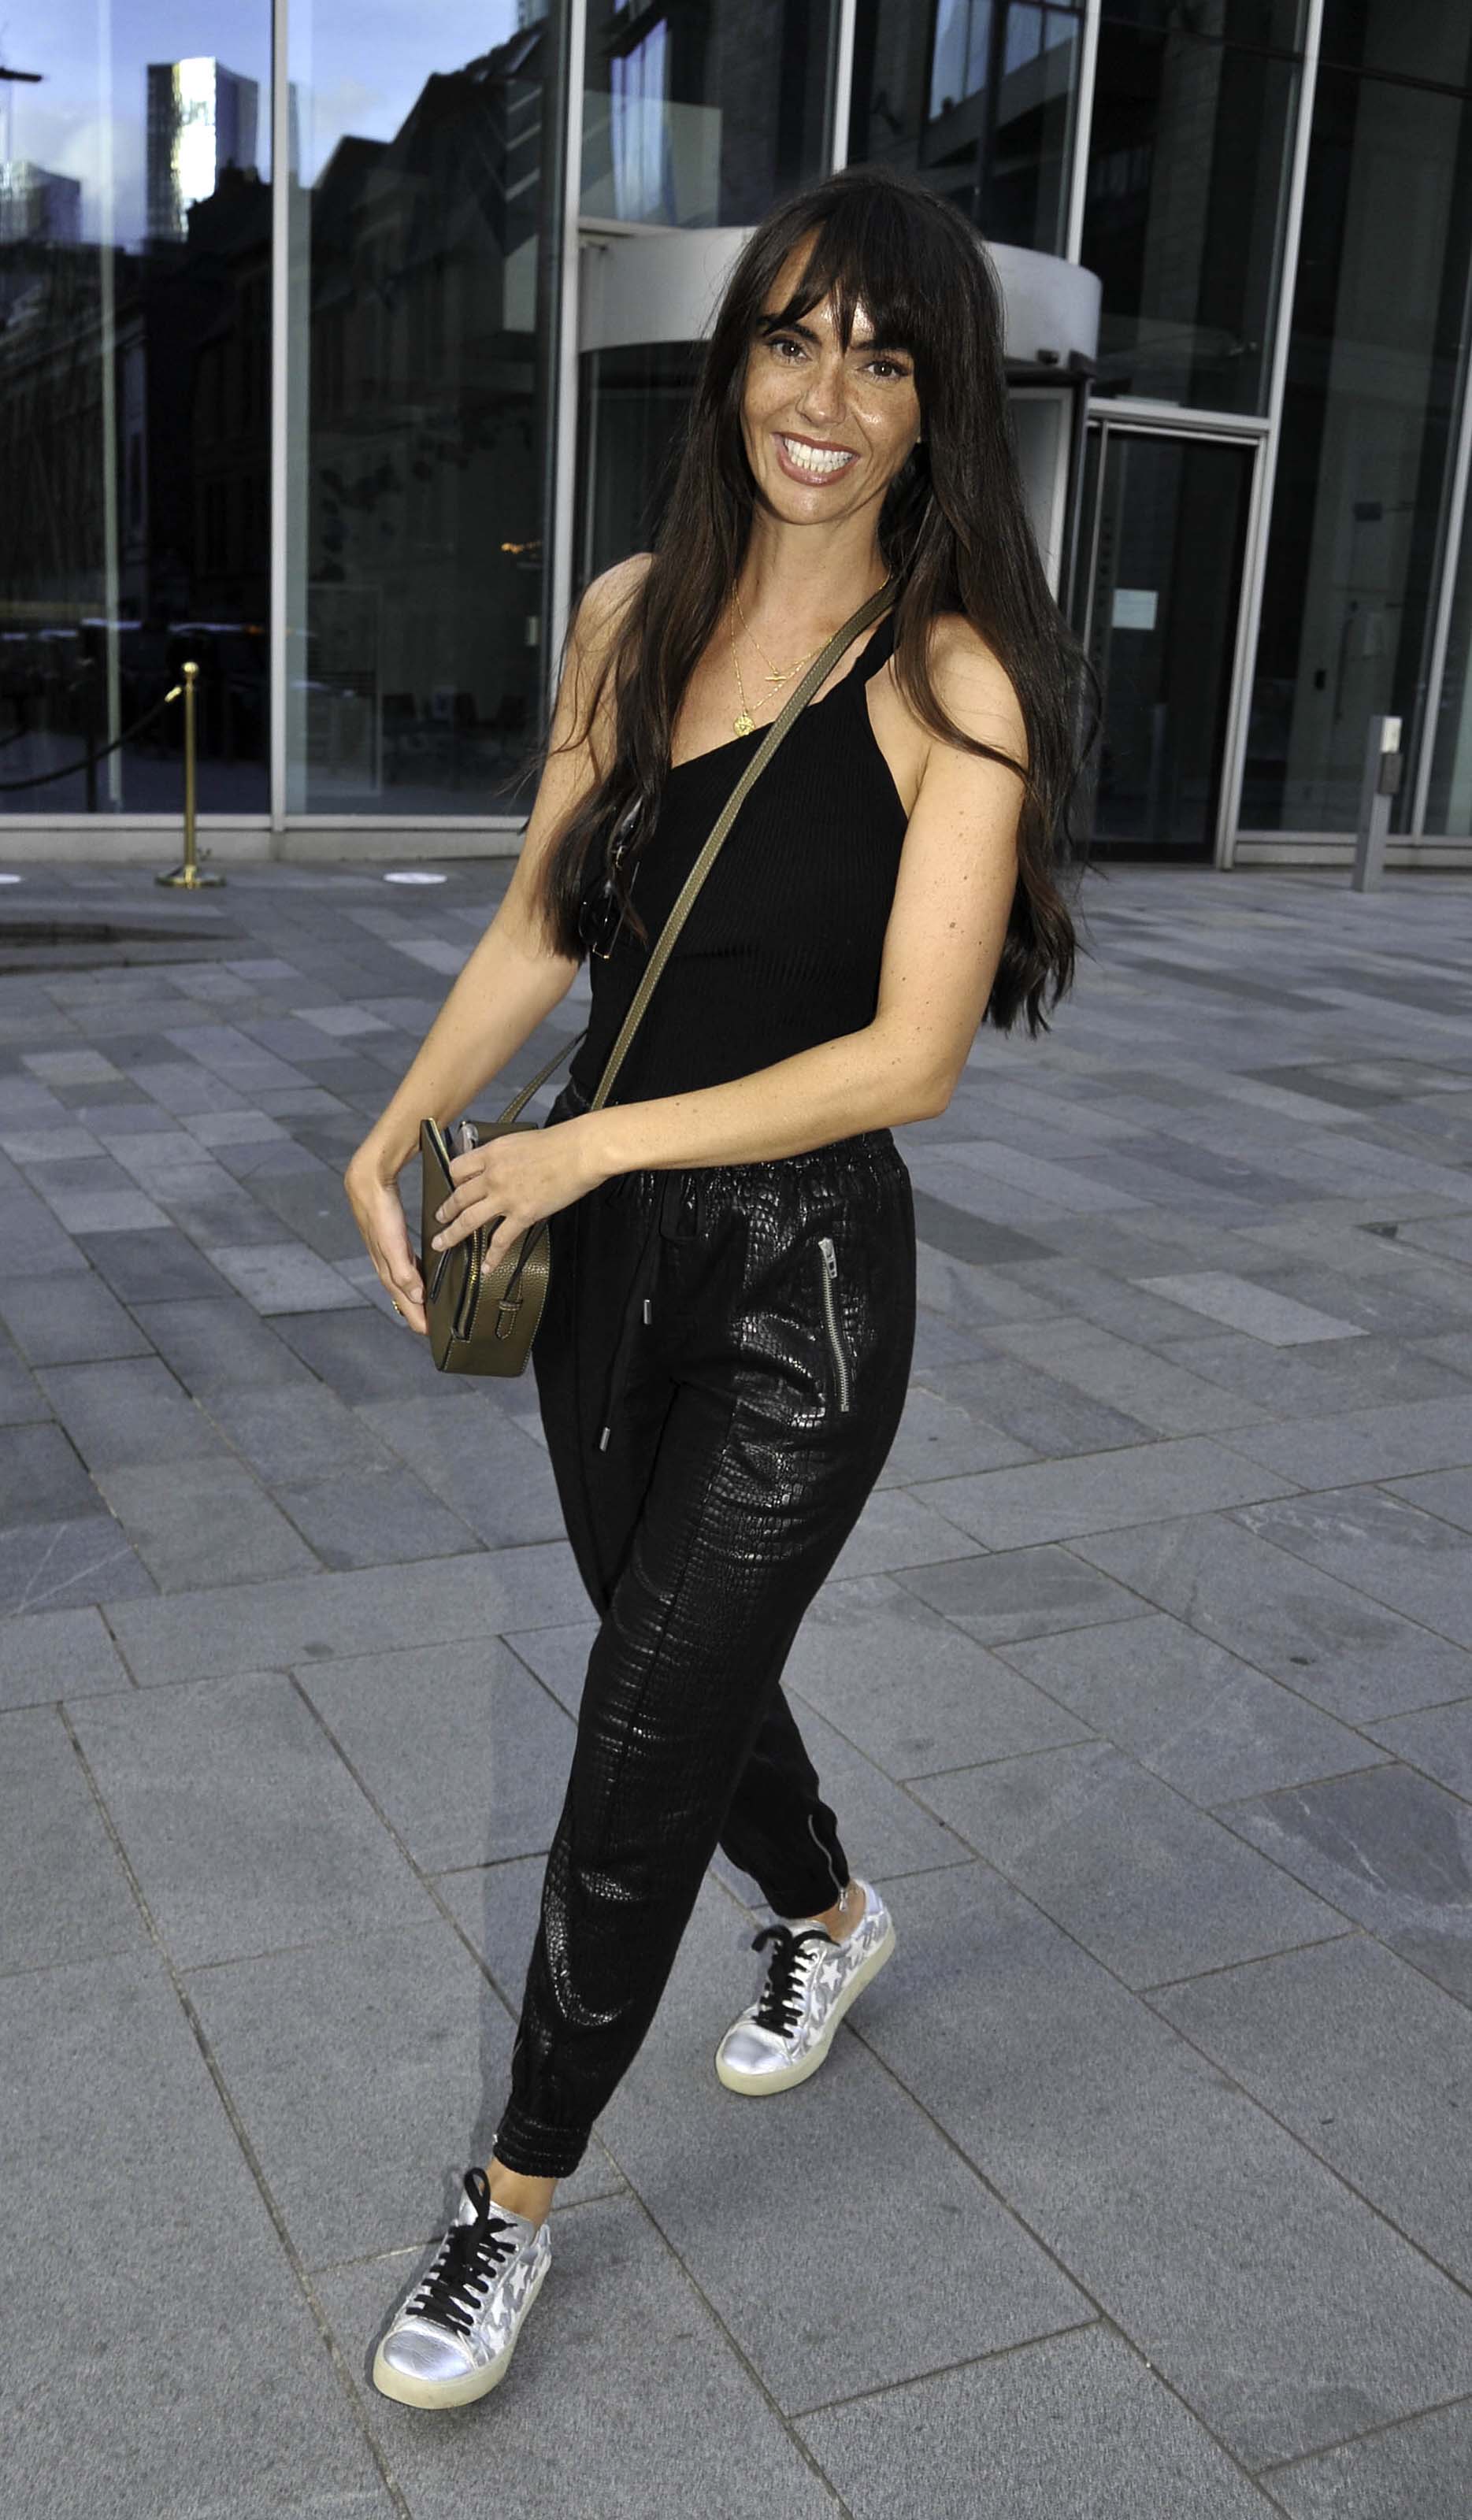 Jennifer Metcalfe at The Ivy for Chelsee Healey’s birthday